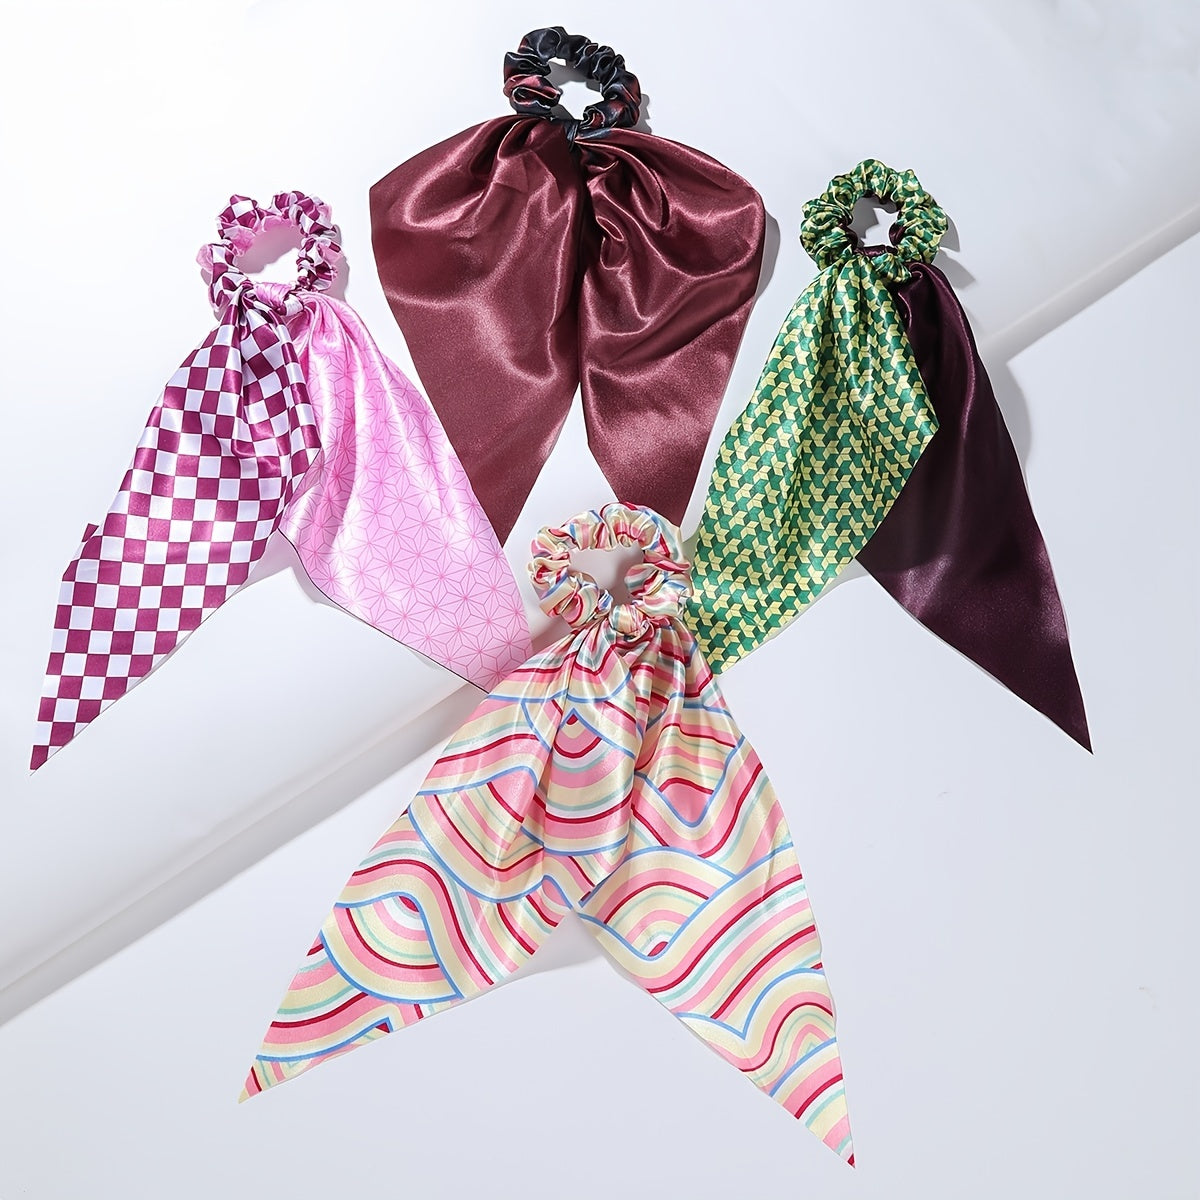 4pcs Adorable Japanese Anime Cartoon Printed Fabric Bowknot Hair Scarves with Elastic Hair Ties for Women - Soft, Comfortable, and Easy to Wear Ponytail Holders for Various Hairstyles - Cute Hair Accessories for Anime Fans - Rexpect Nerd